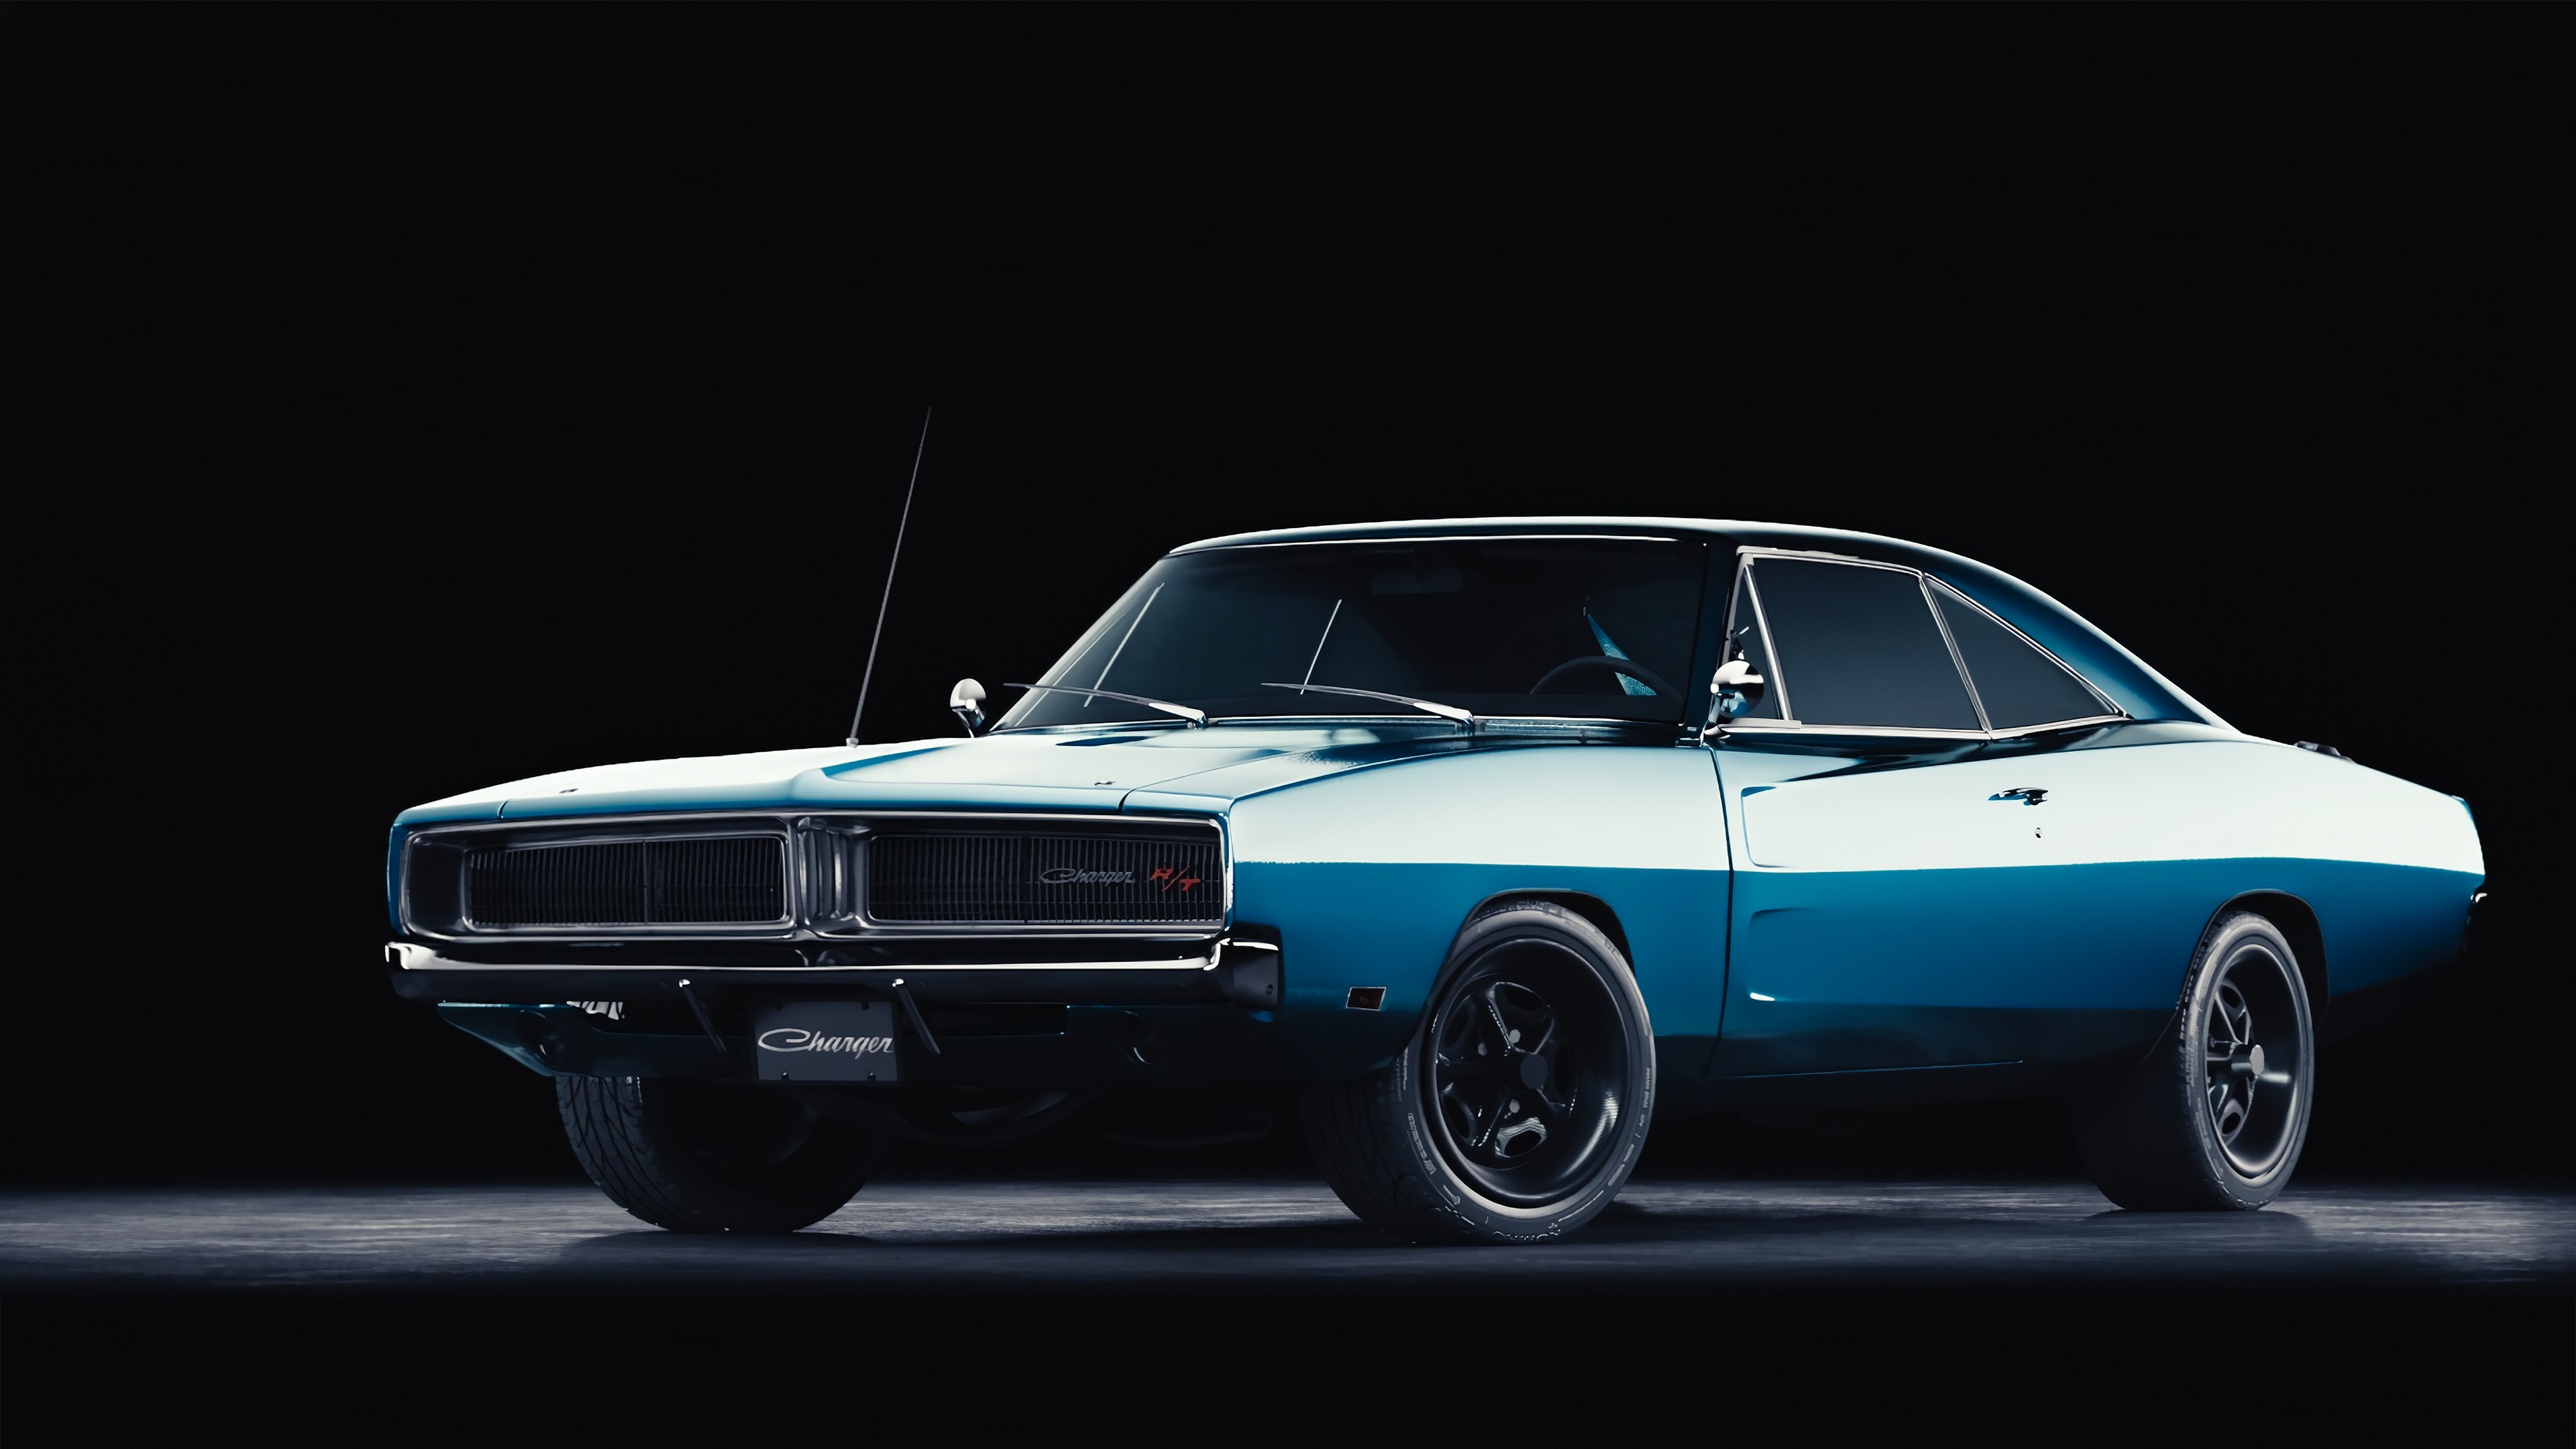 Dodge Charger, Classic muscle car, Speed and power, Iconic design, 3840x2160 4K Desktop